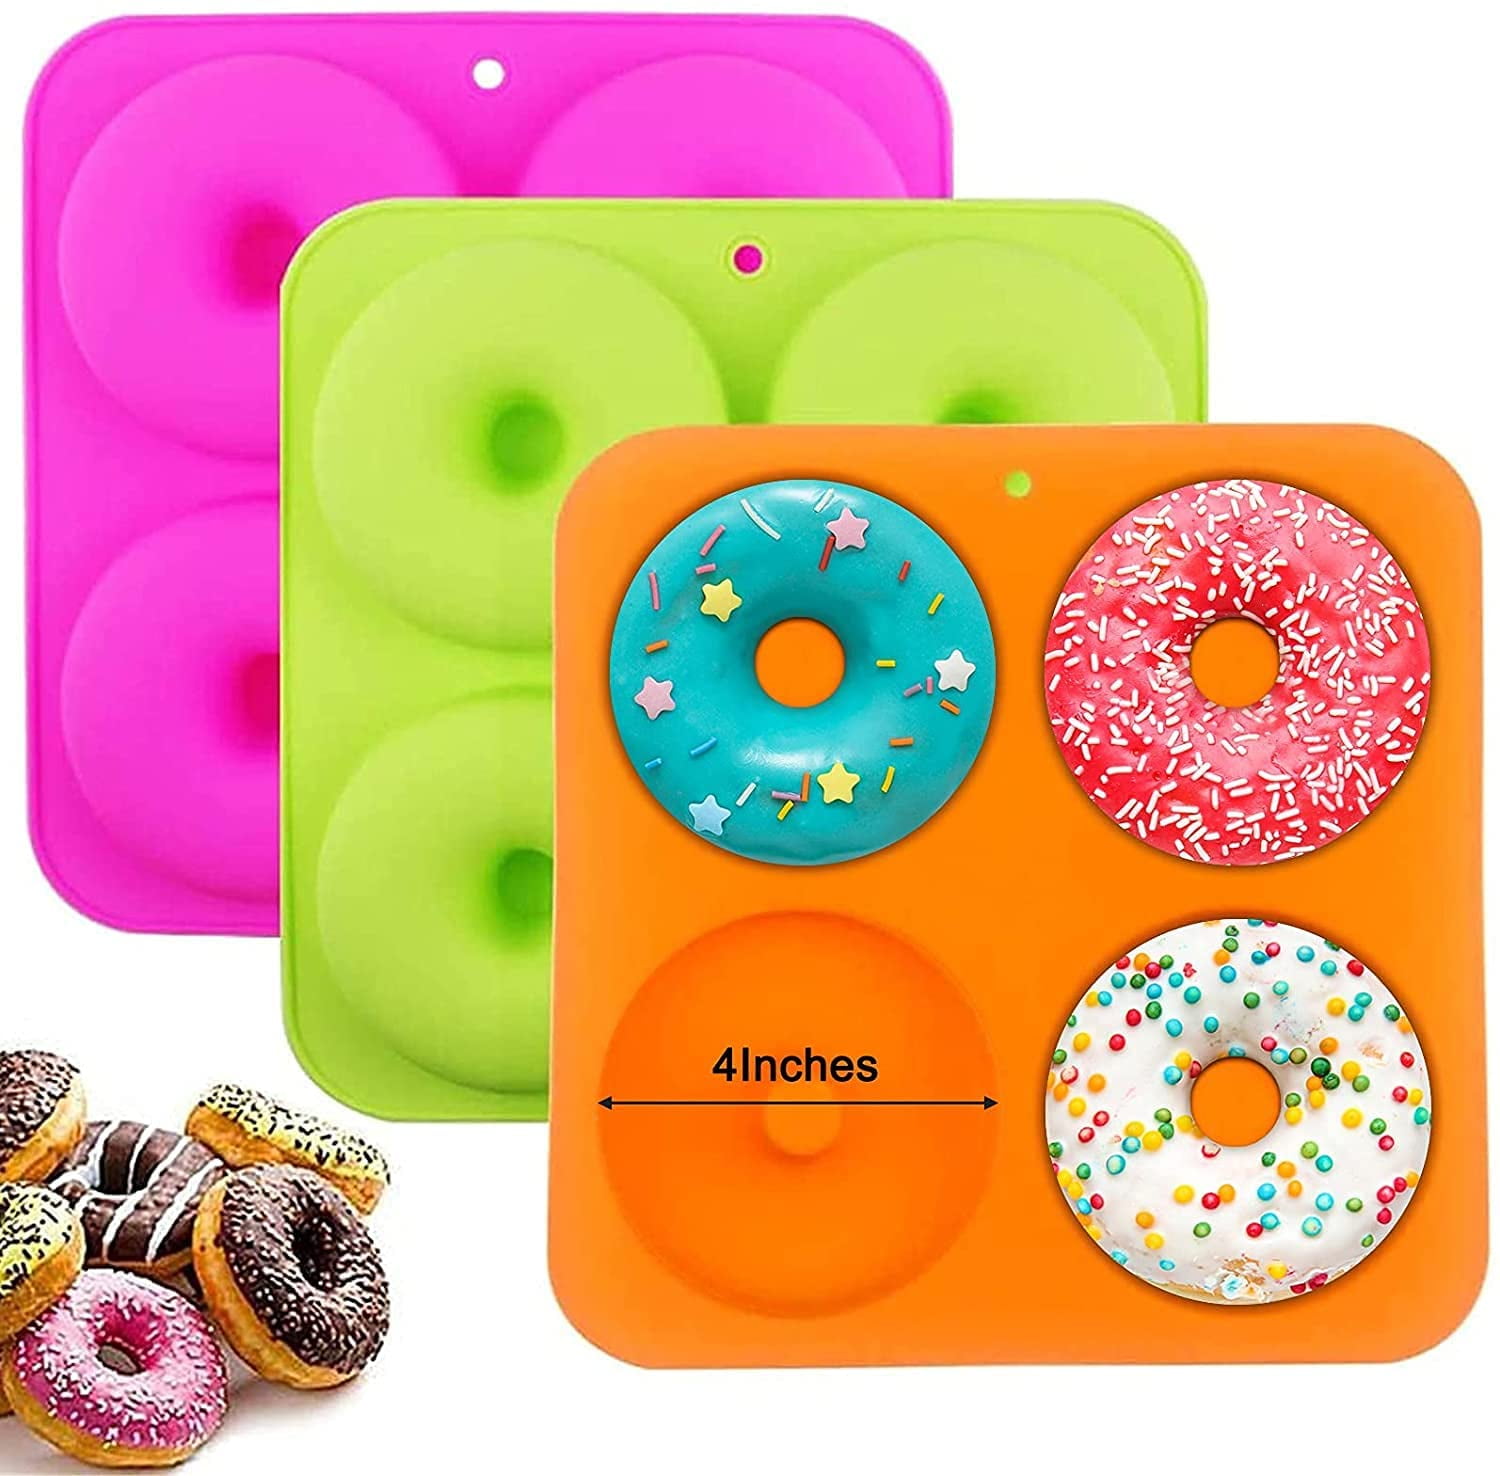 Encouragement carpenter rice 3pcs Large Full Size Donut Pan 4Inches, Silicone Donut Molds for Baking,  Non Stick Bagel Pan - Walmart.com